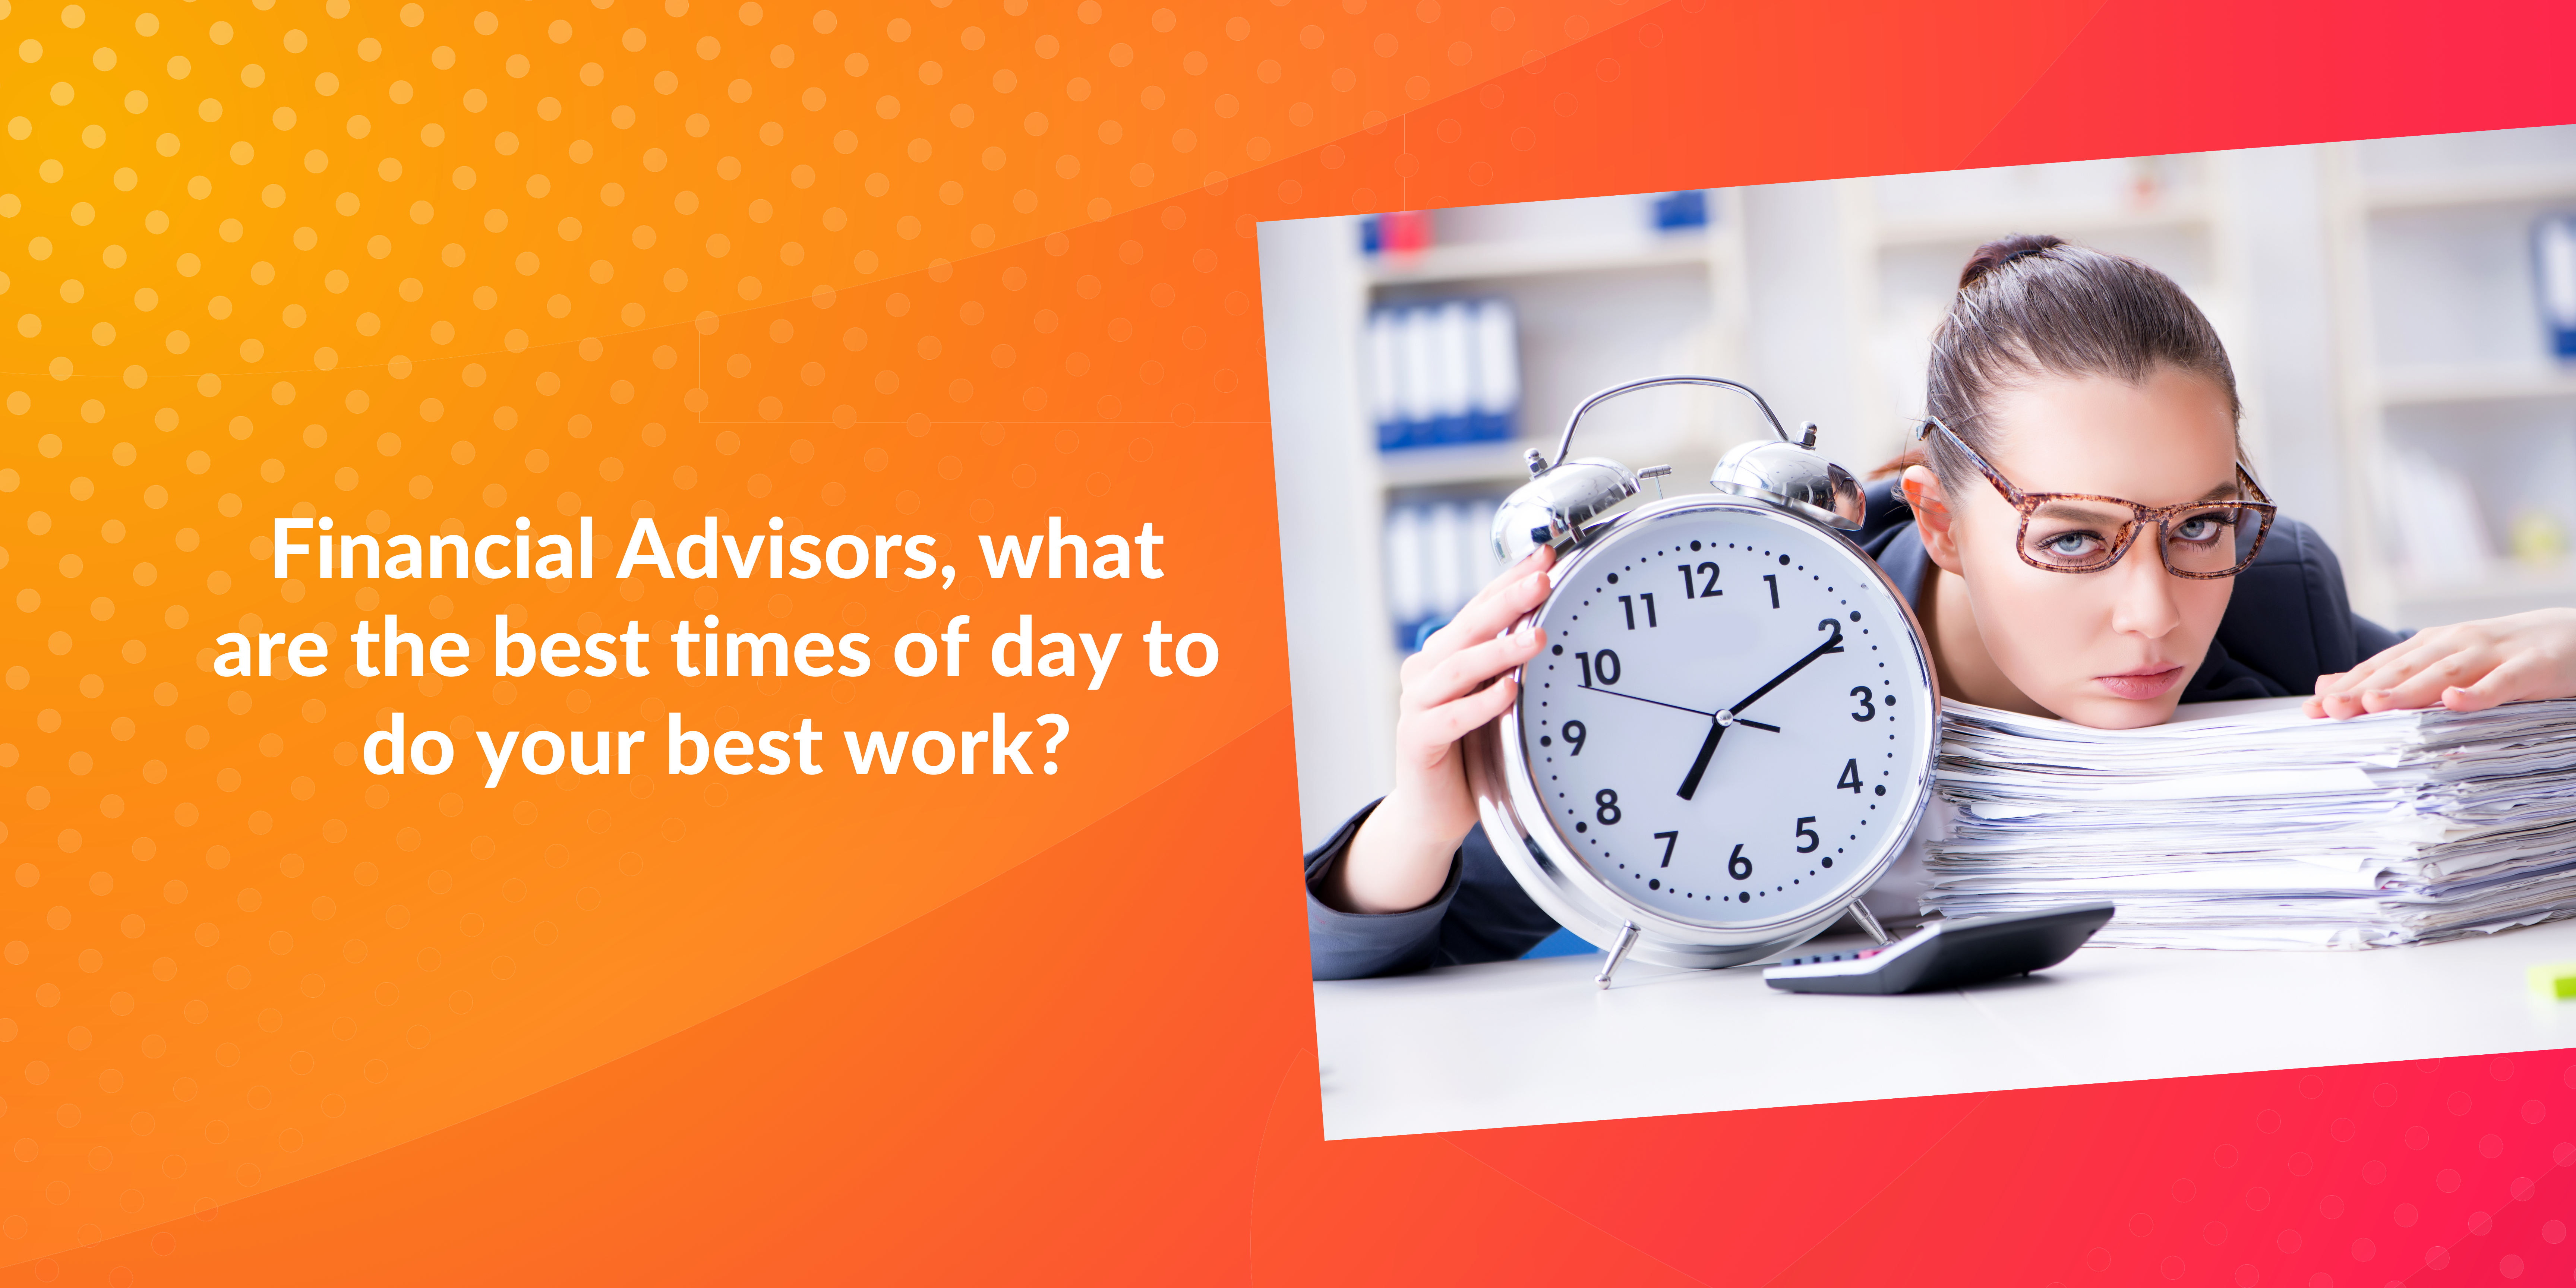 Financial Advisors Best Time to do your work